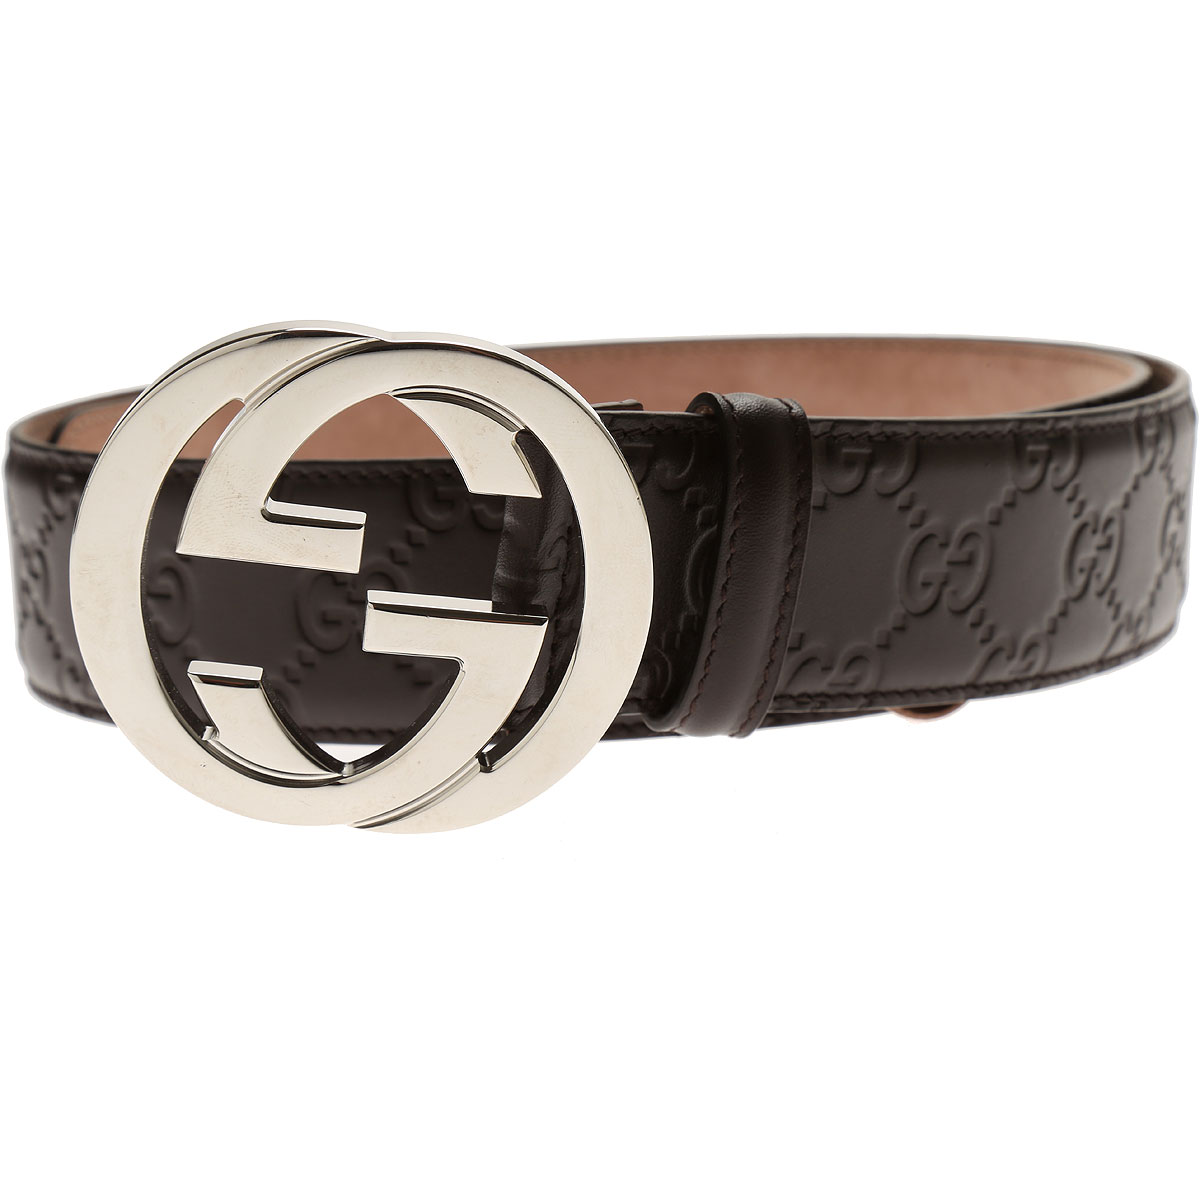 Mens Belts Gucci, Style code: 411924-cwc1n-2140